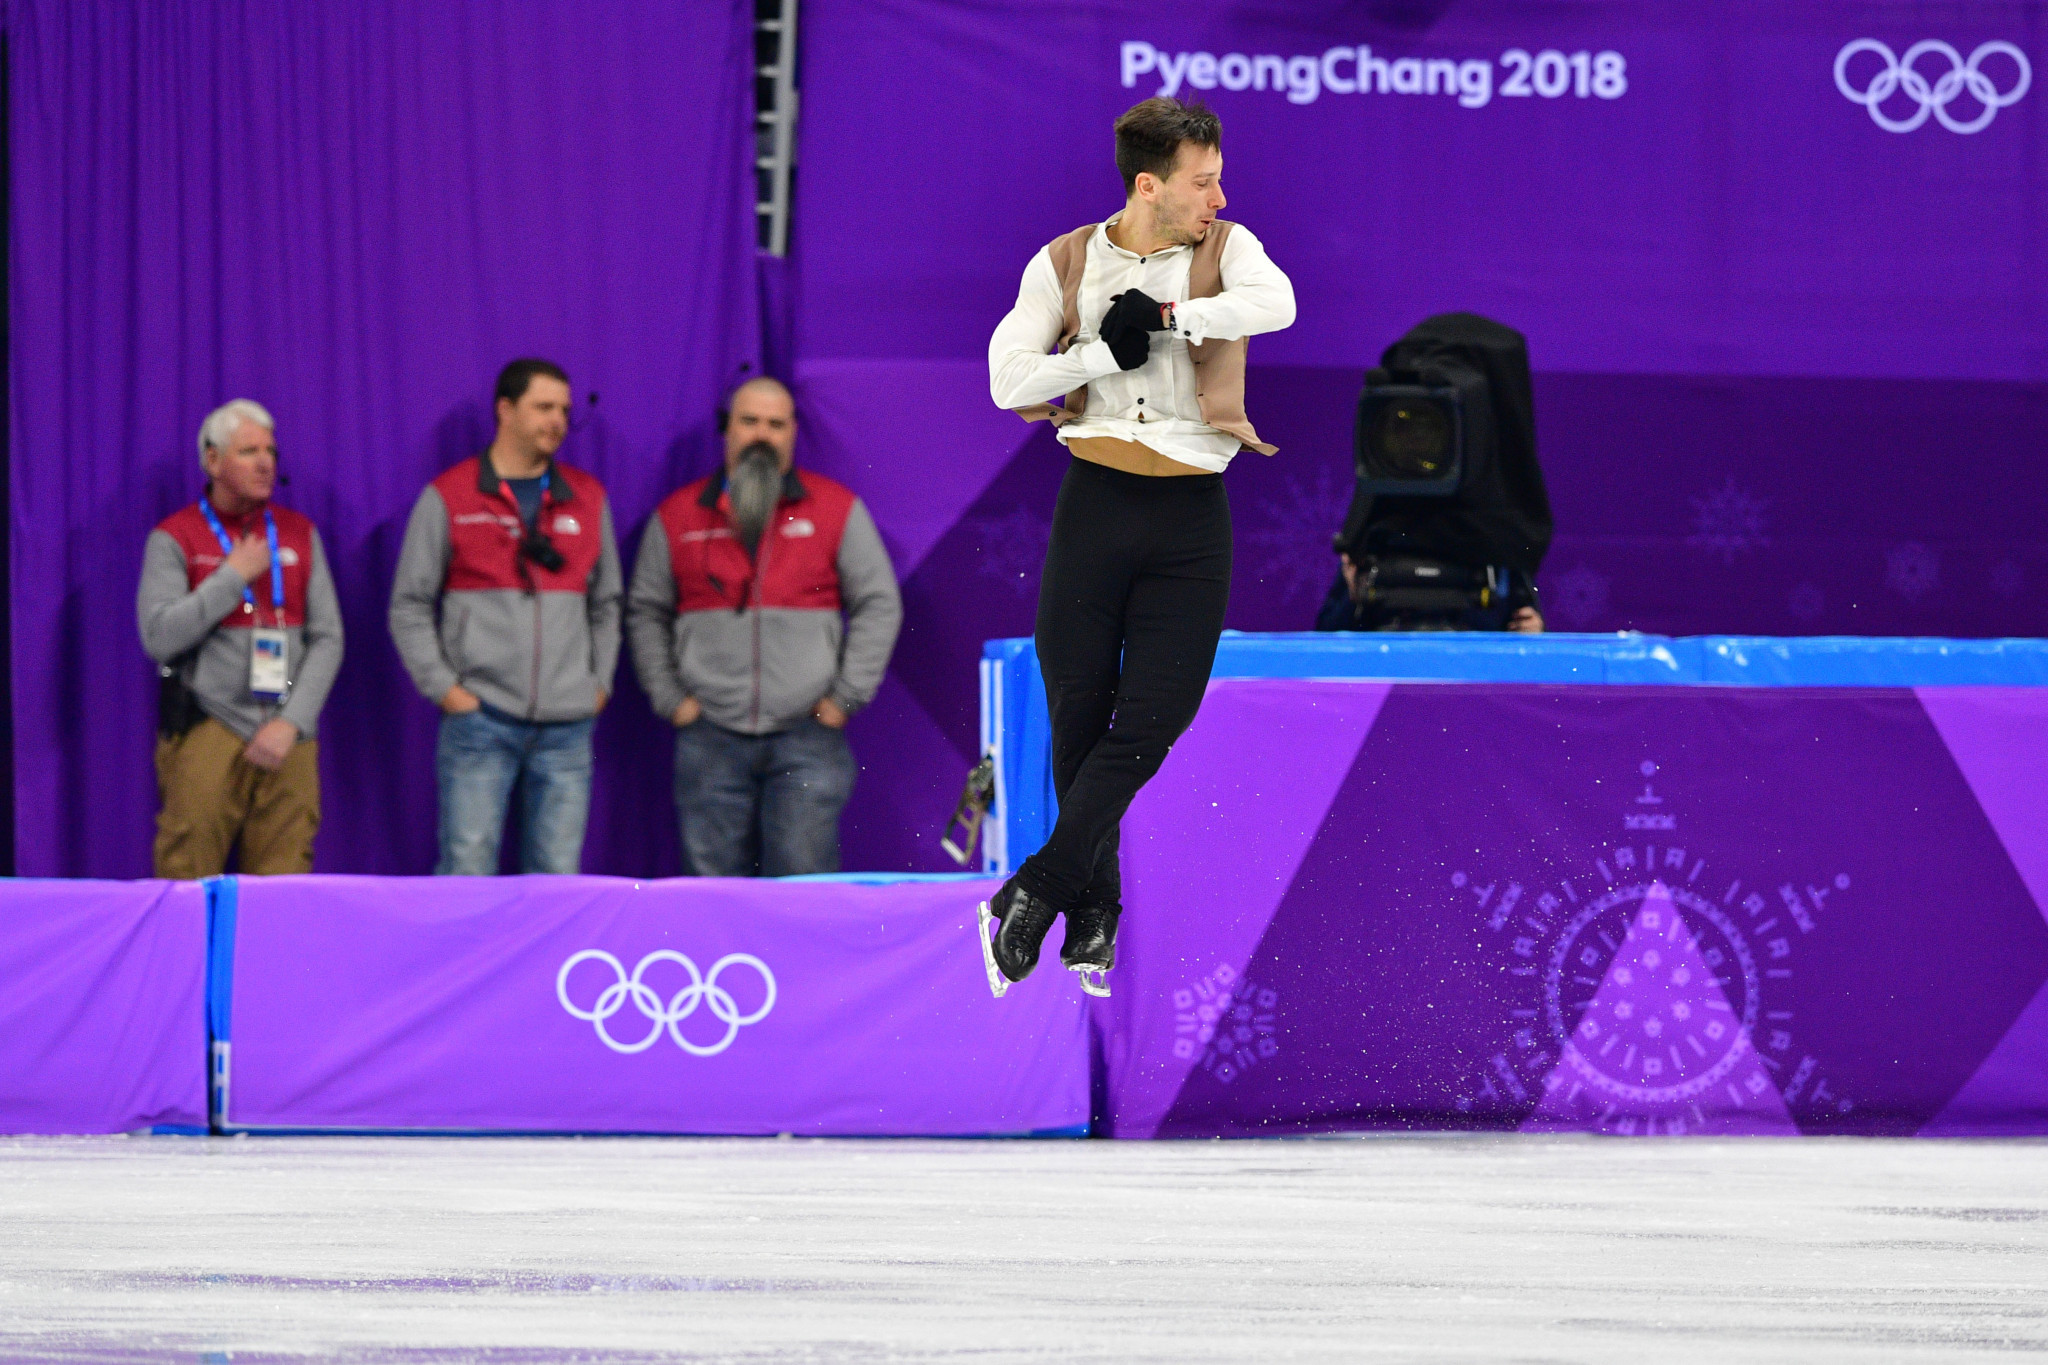 insidethegames is reporting LIVE from the Winter Olympics in Pyeongchang